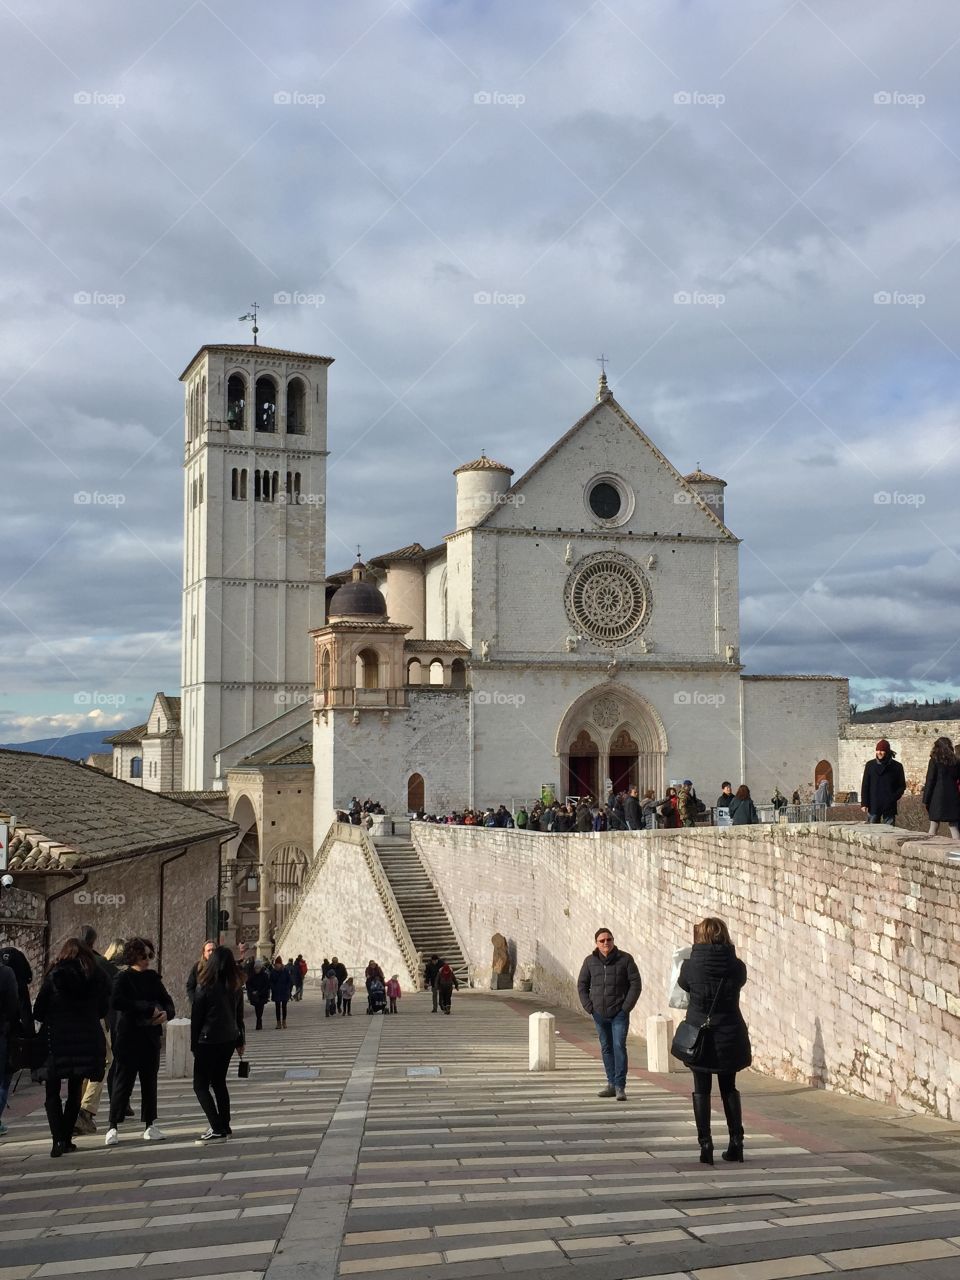 Cloudy day view of the Basilica of St. Francis in Assisi, Italy. Shot from the ramp leading down to lower basilica. December 2017.